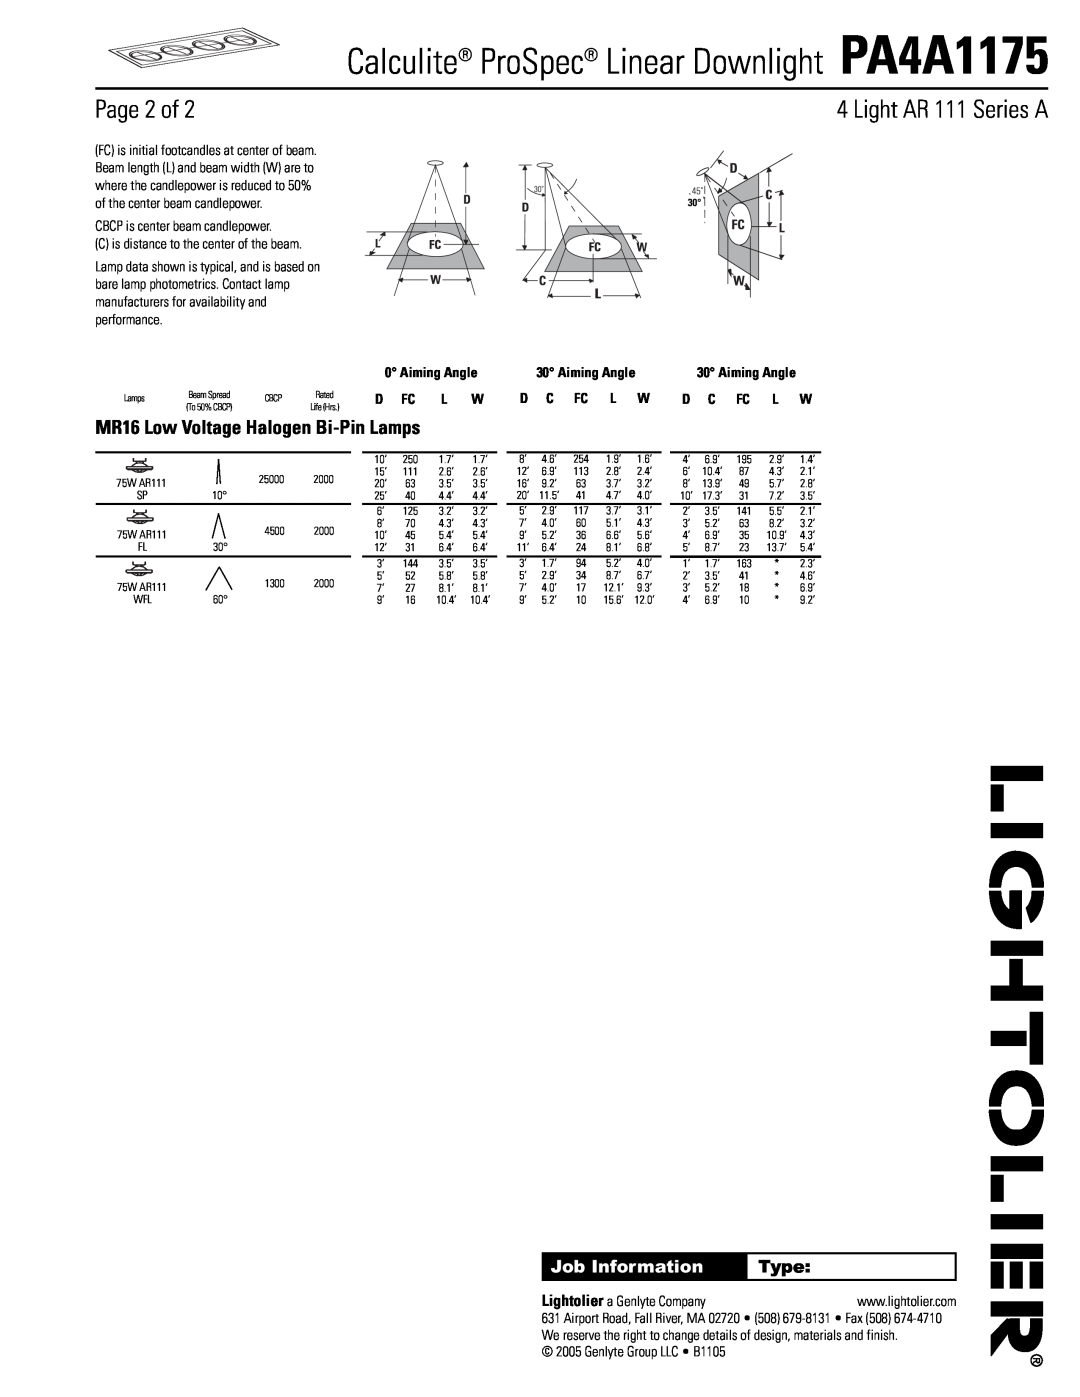 Lightolier Page 2 of, Light AR 111 Series A, Calculite ProSpec Linear Downlight PA4A1175, Job Information, Type, D Fc 